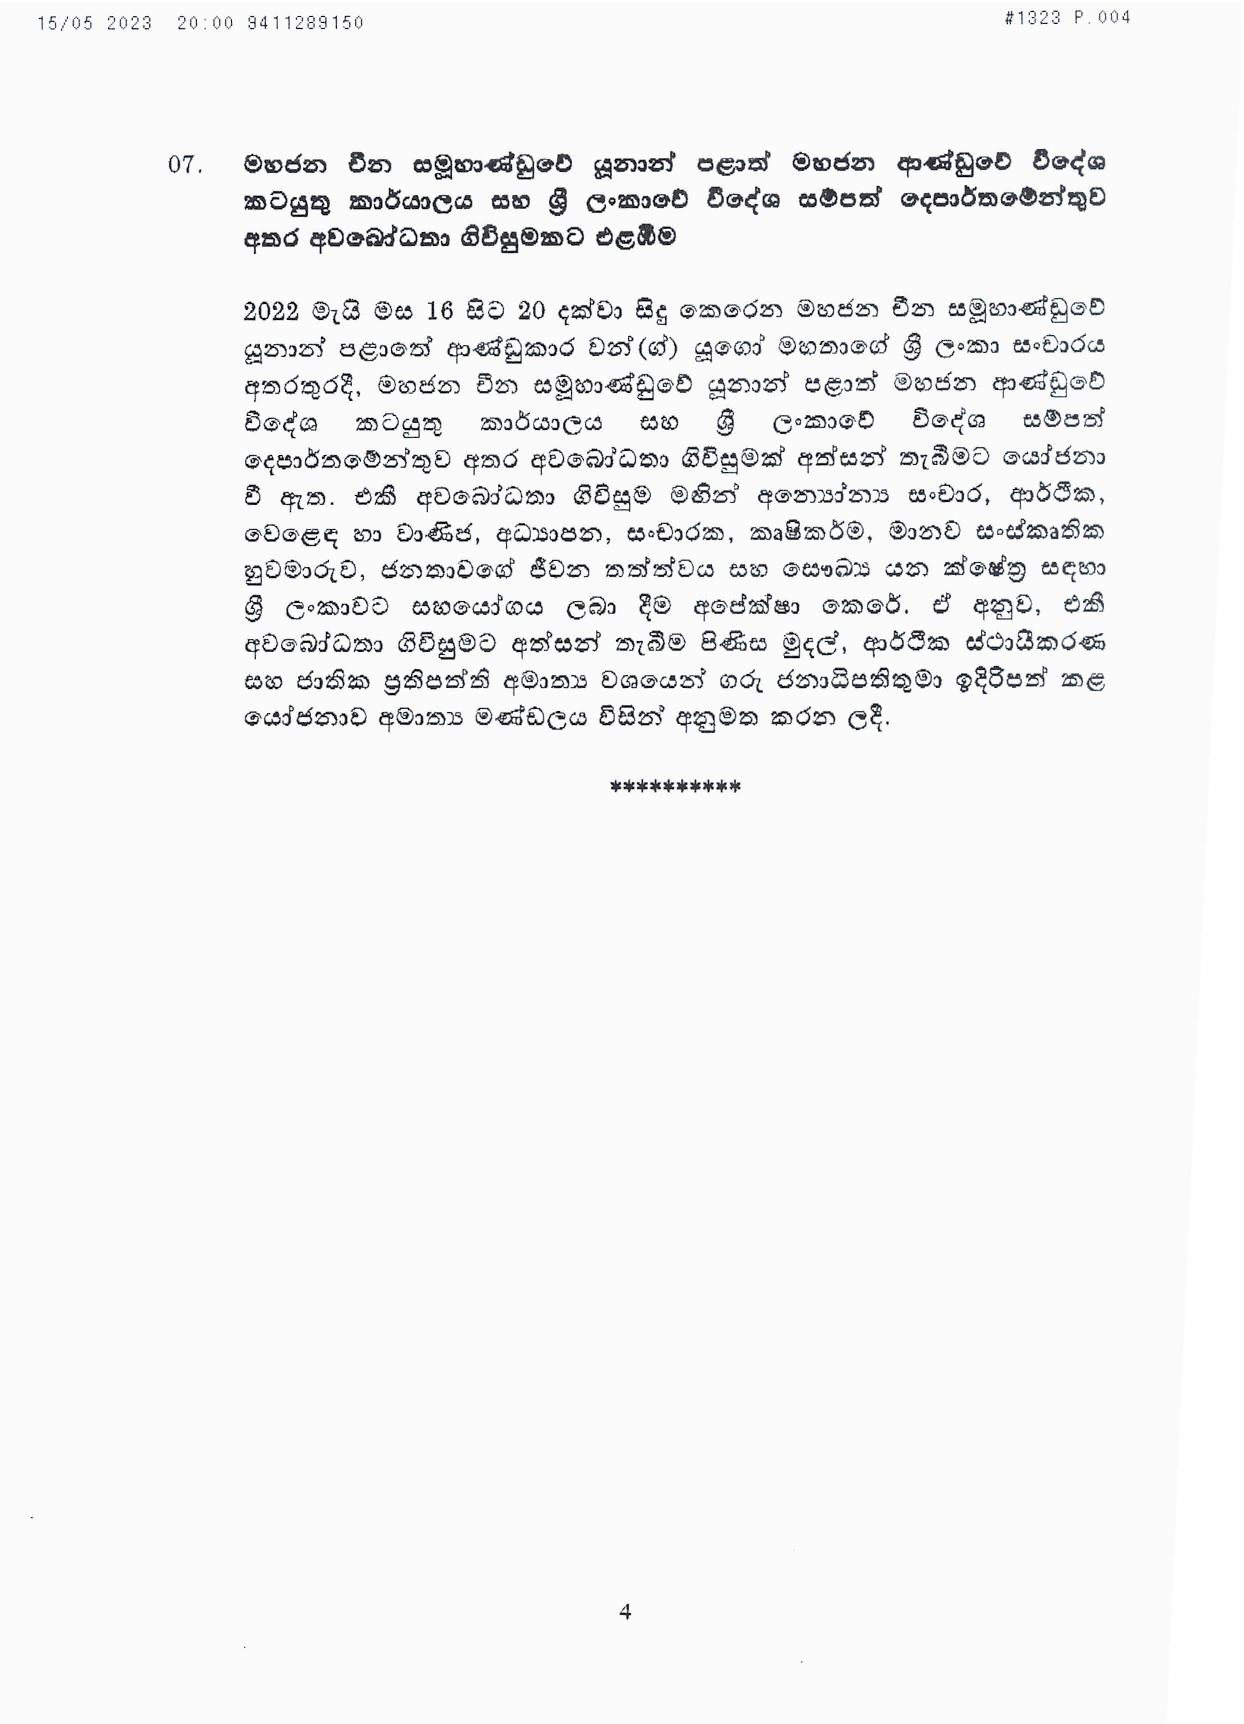 Cabinet Decision on 15.05.2023 page 004